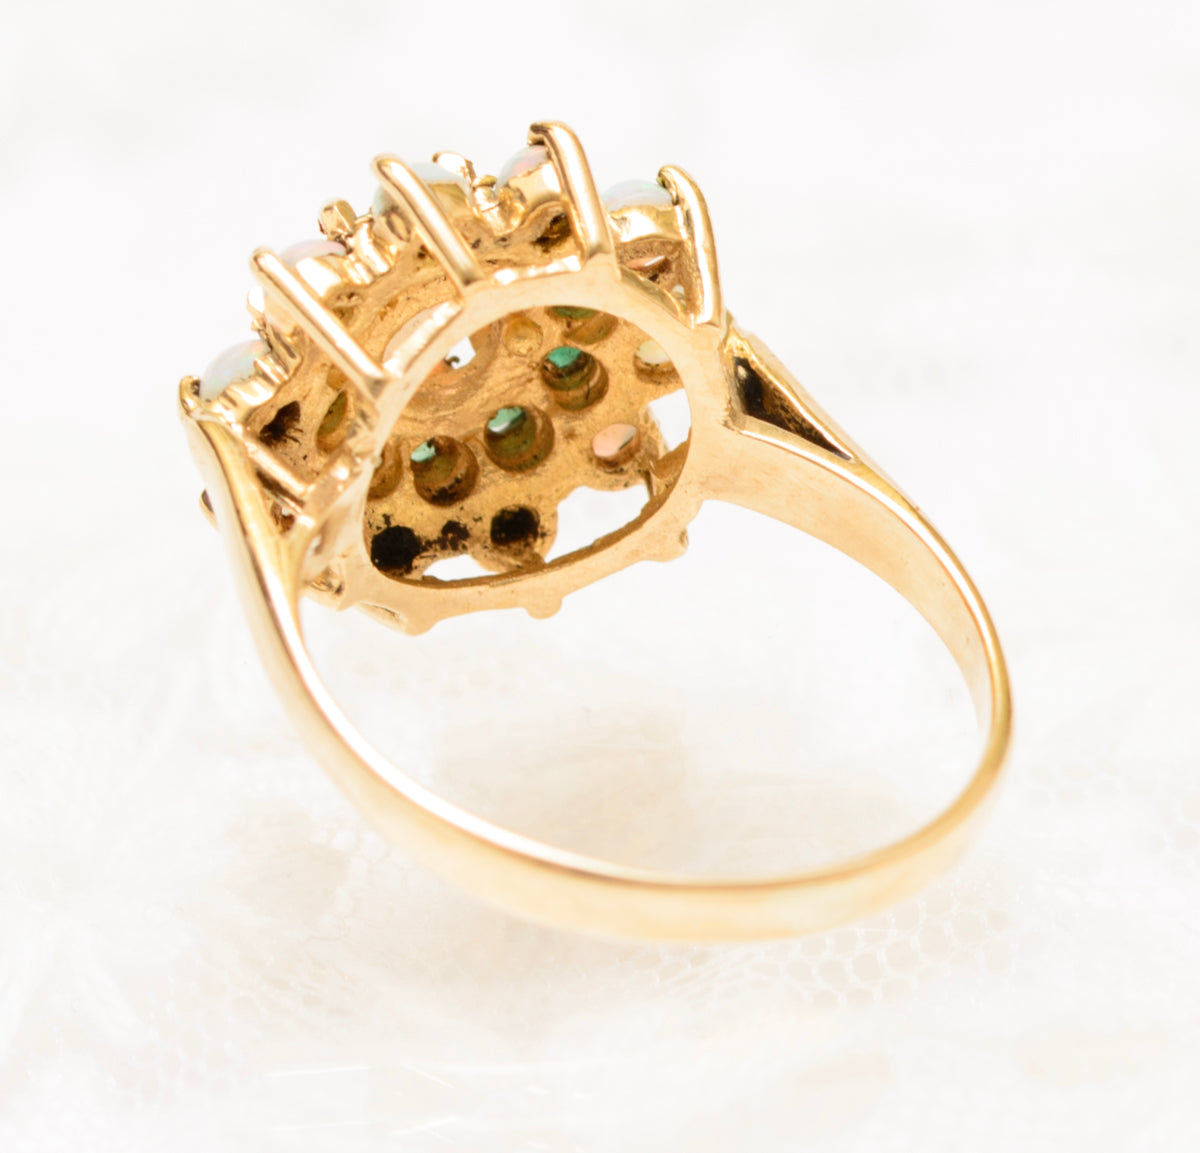 Vintage 9ct Gold Cluster Ring With Natural Emeralds & Opals UK Size M (A1829)